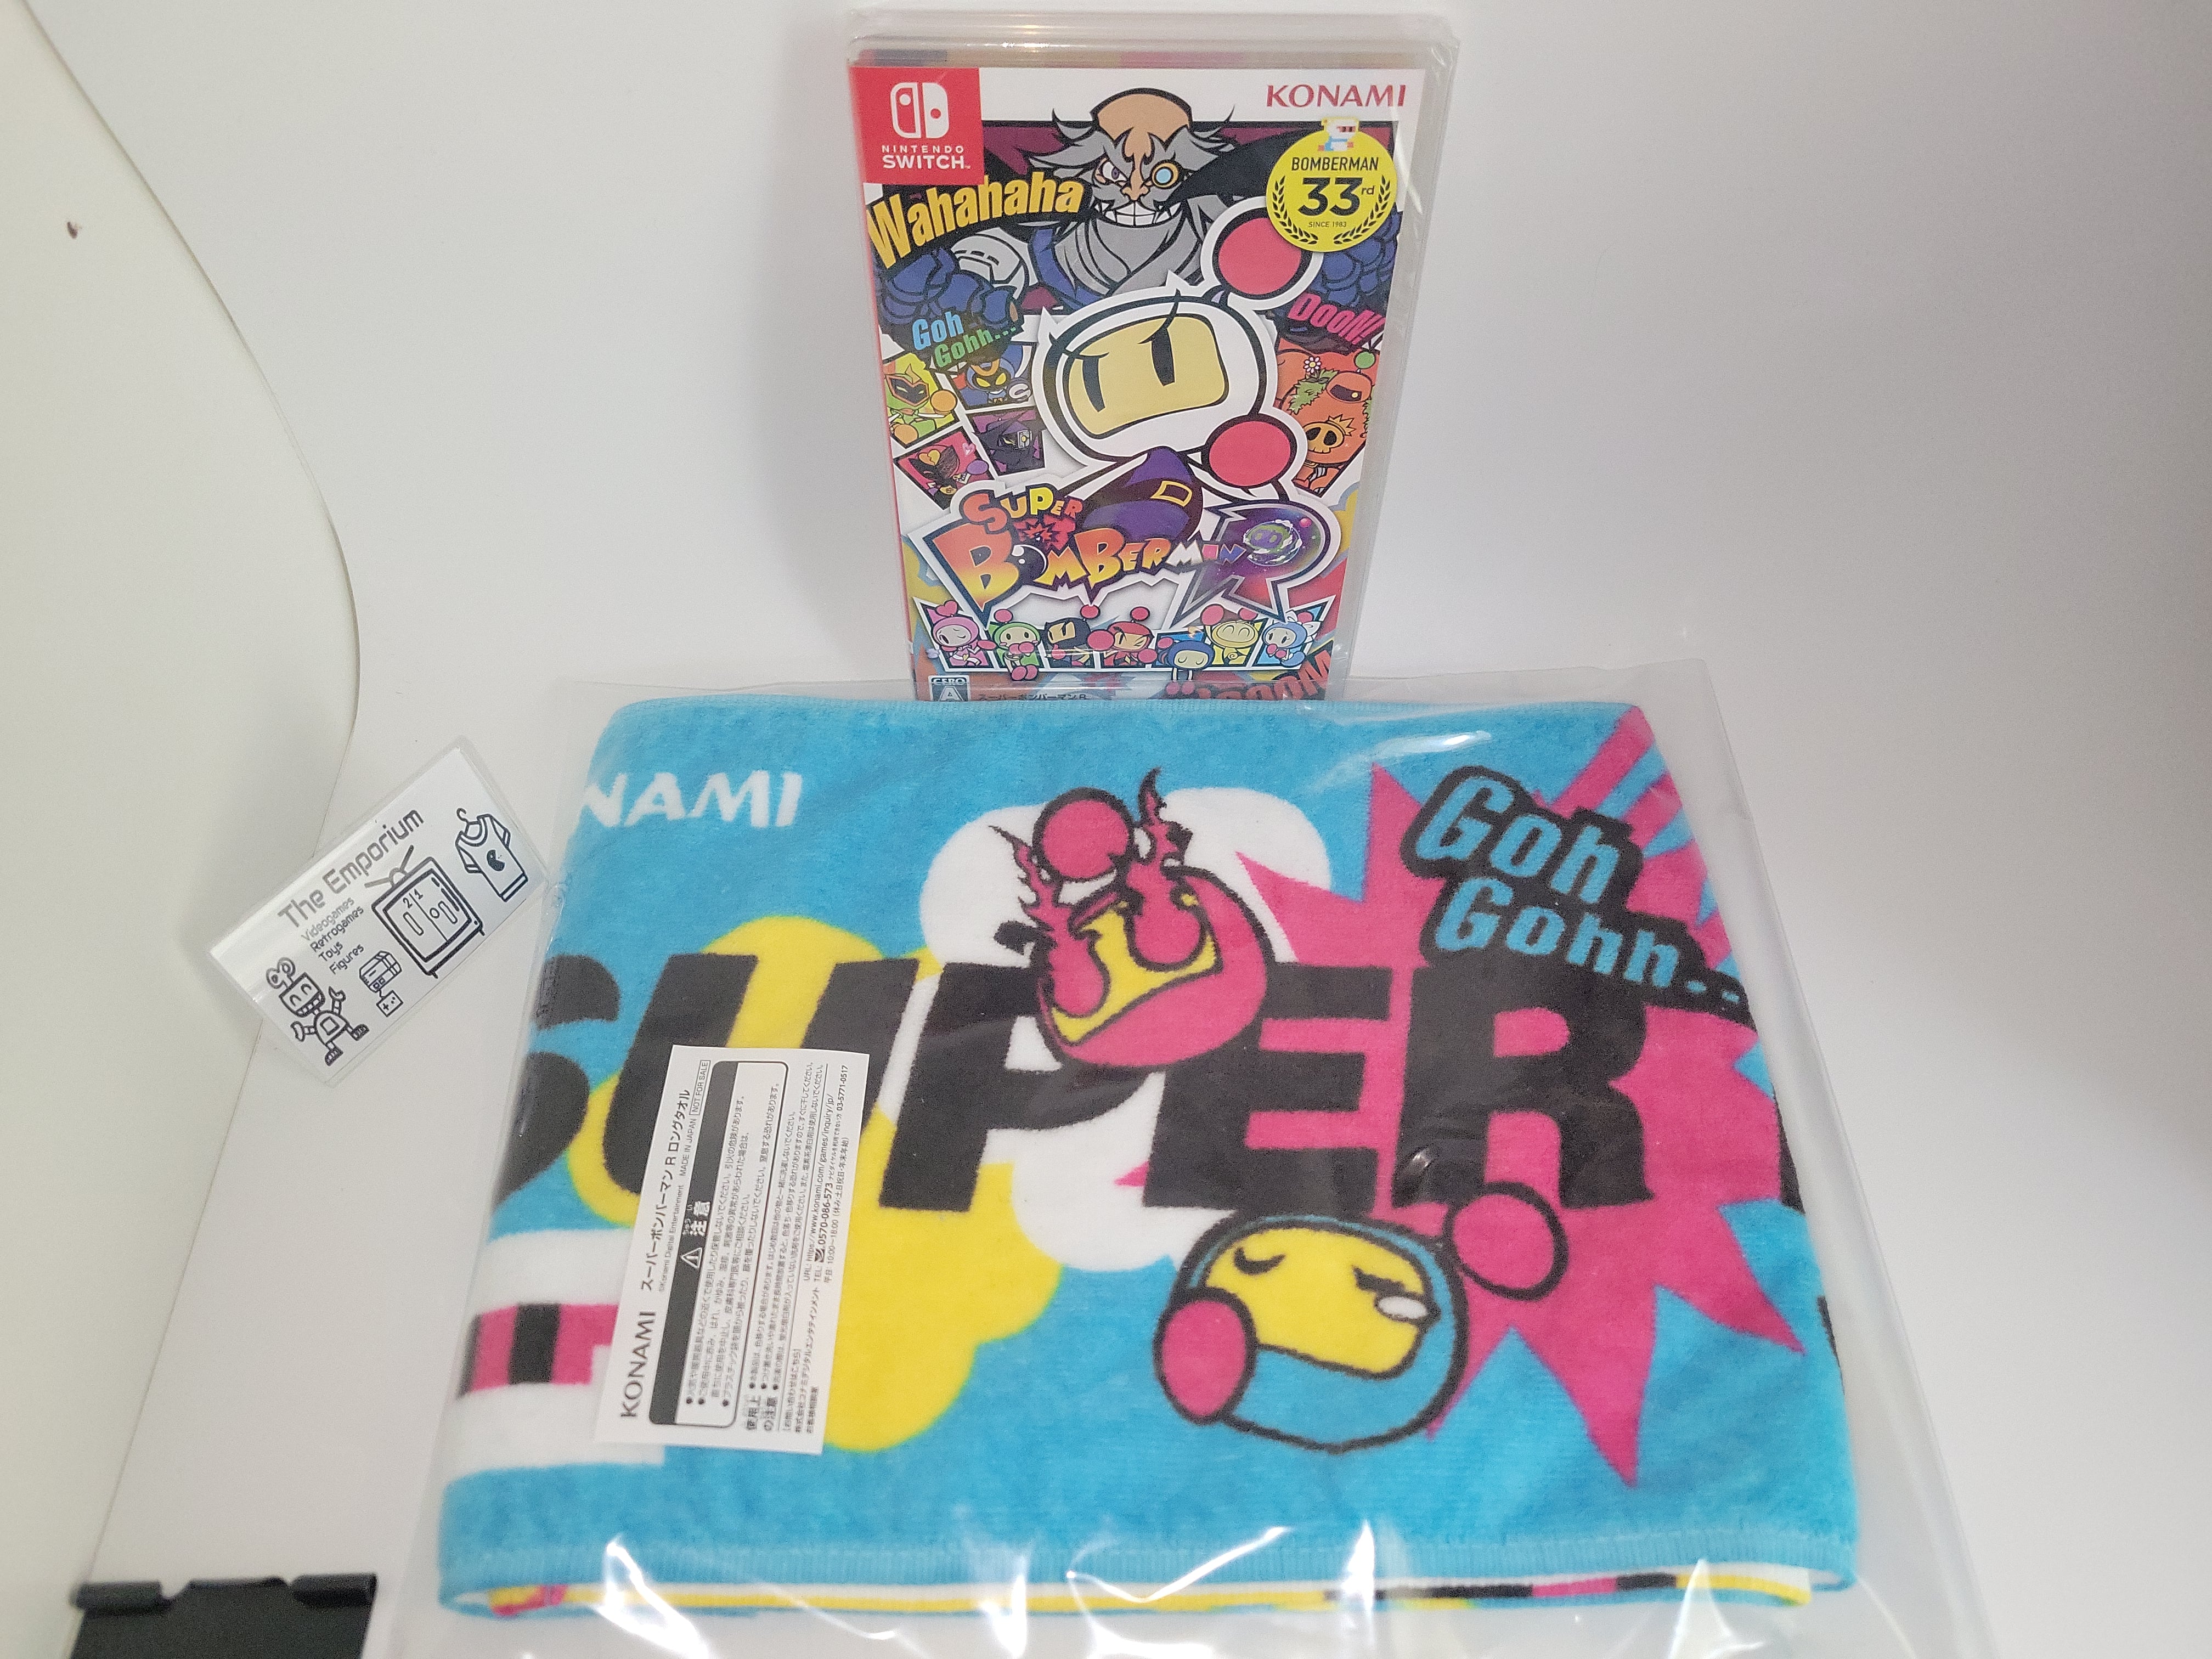 Towel The Konami and RetroGames Super Limited Preorder Bomberman - Switch R Nintendo with Emporium Toys –